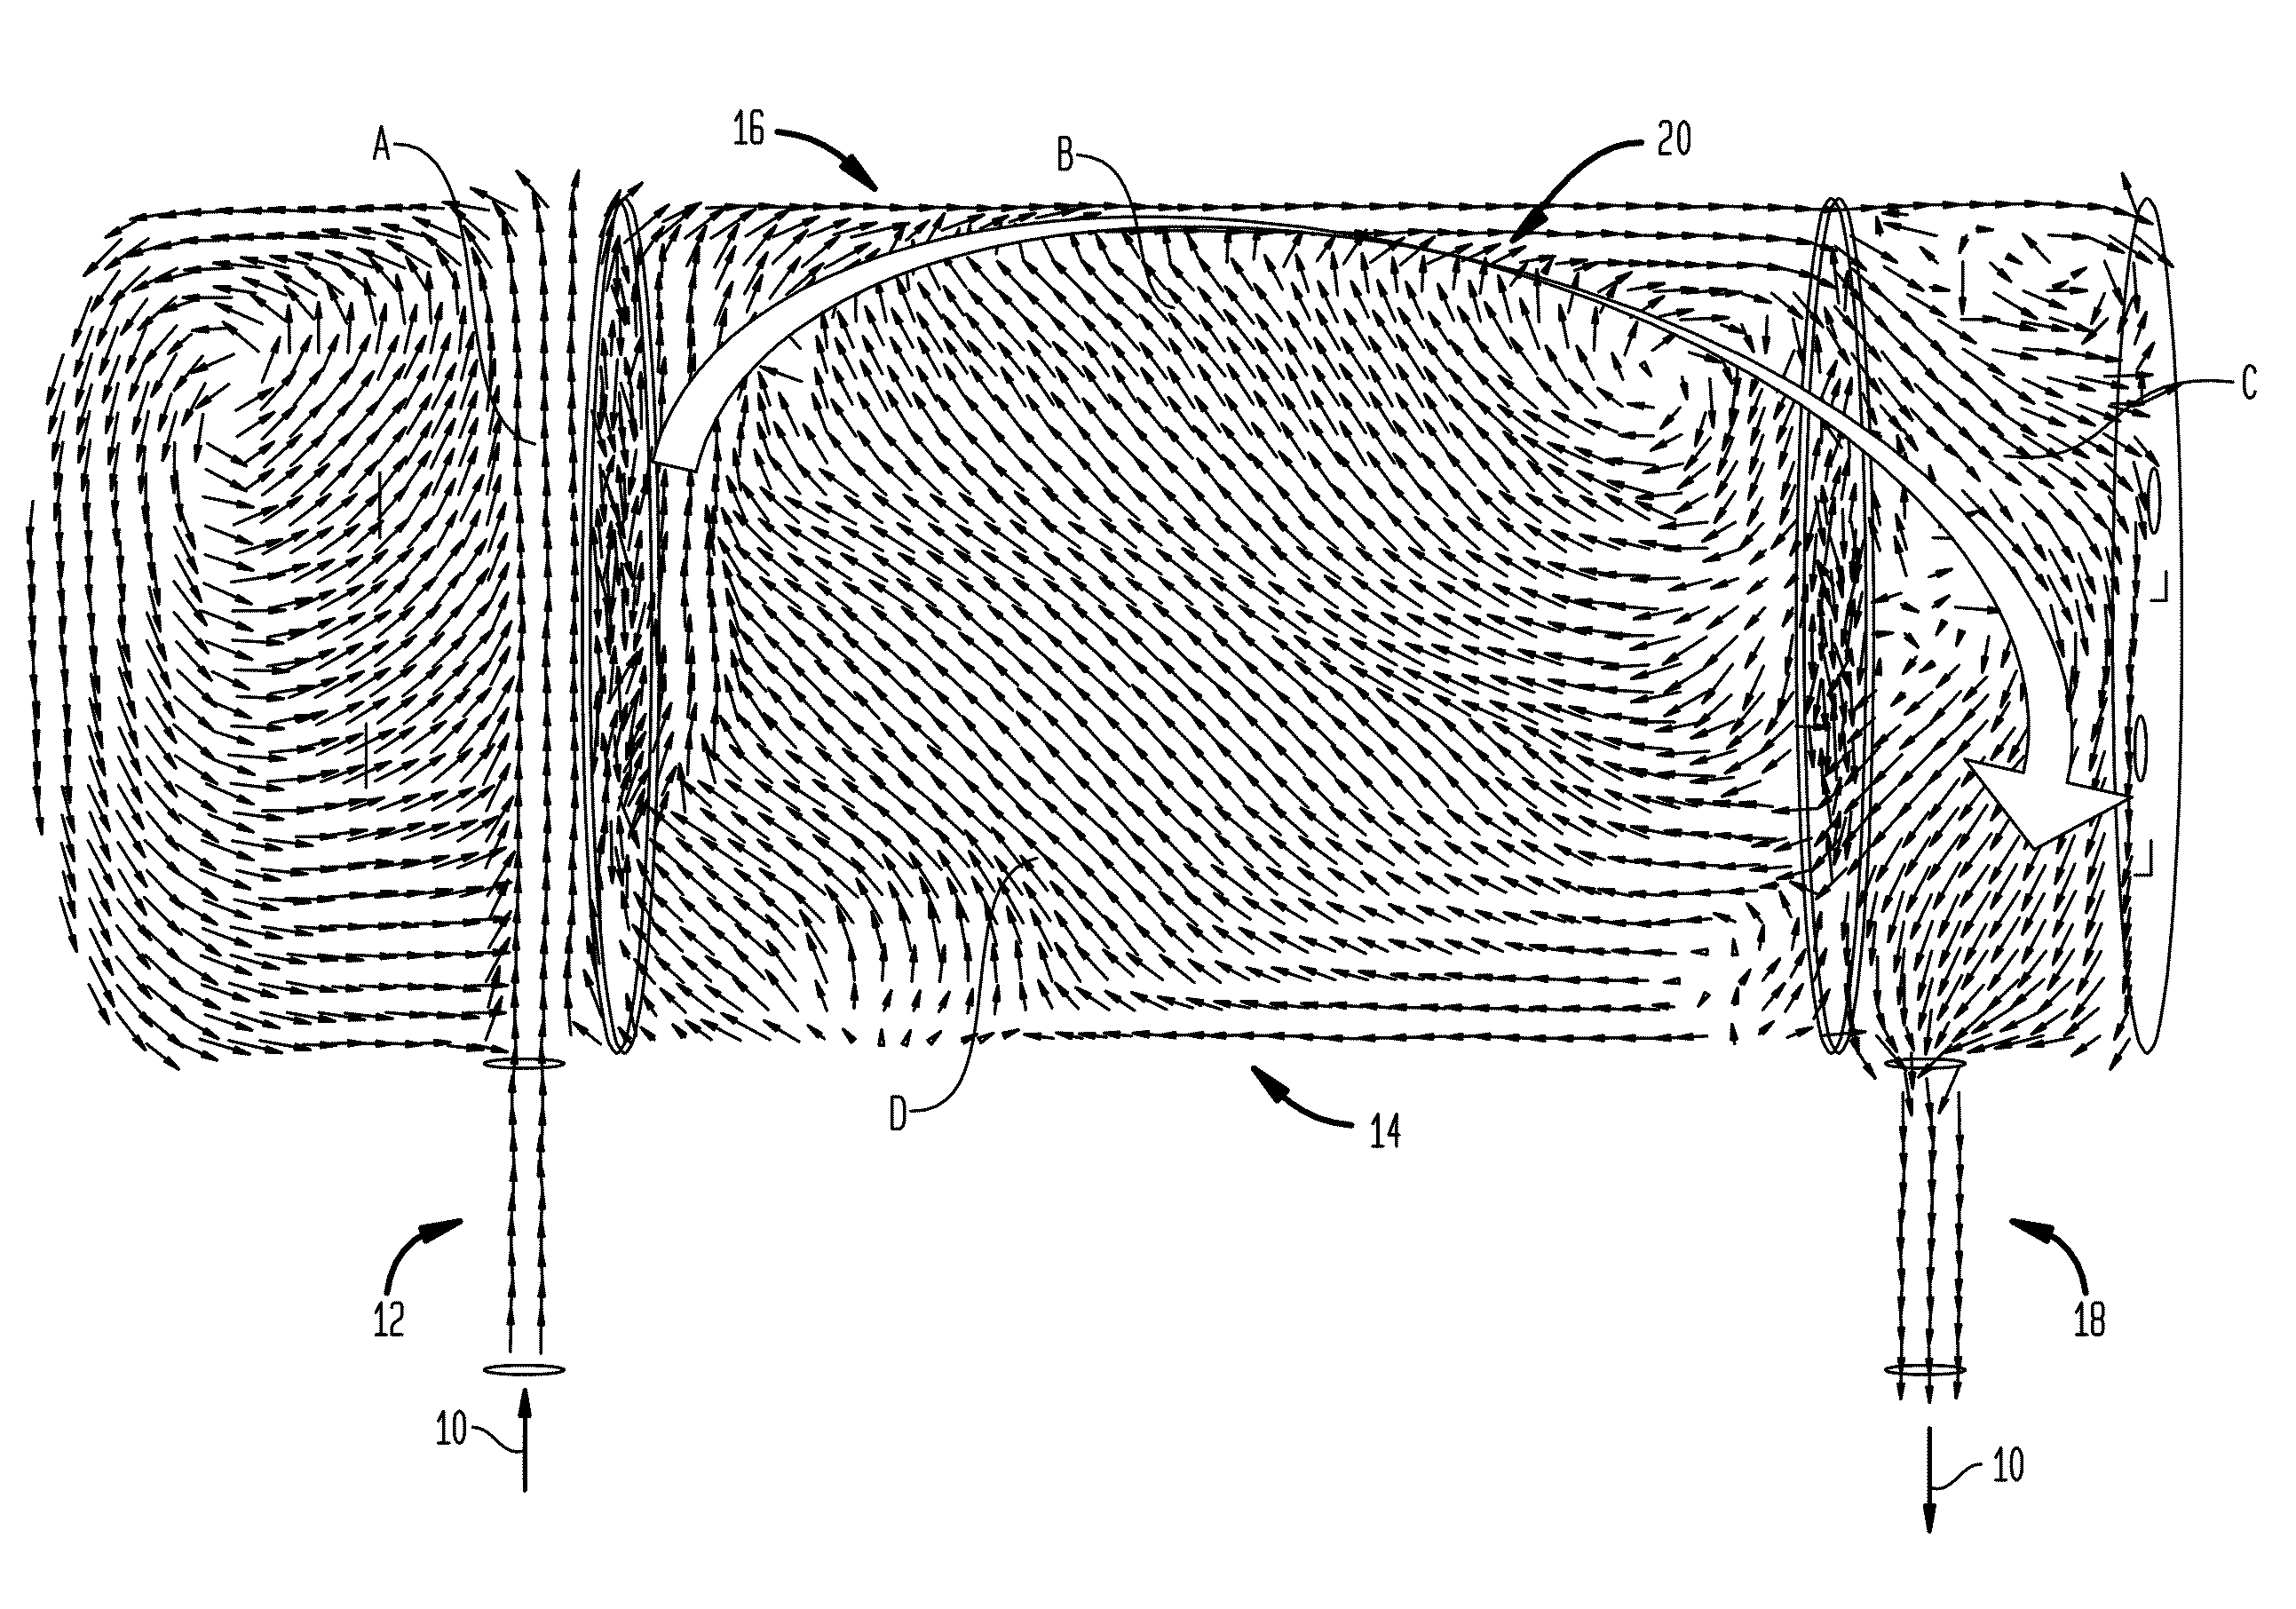 Baffle plates for an ultraviolet reactor